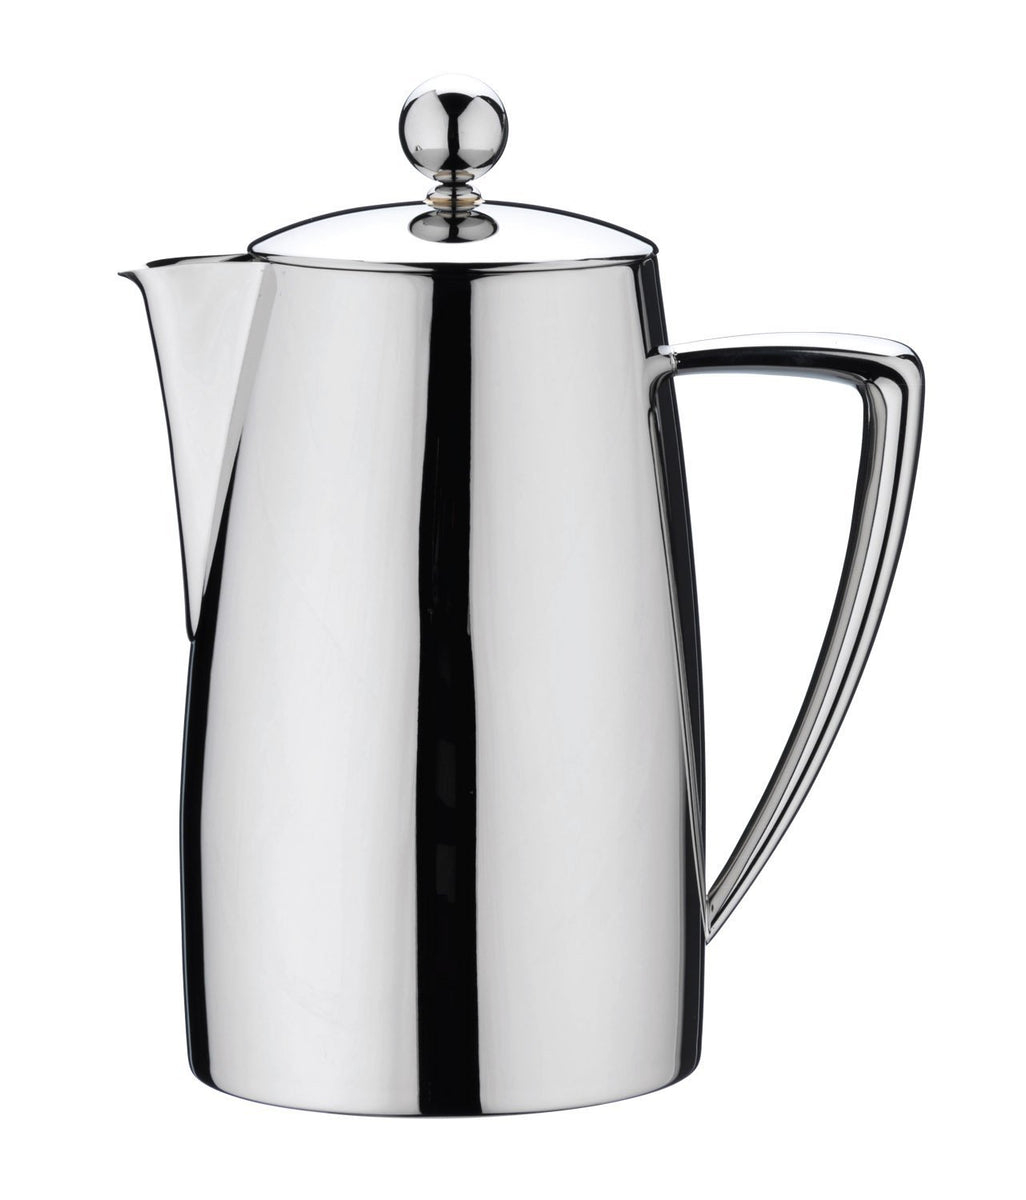 Bellux Insulated Teapot - Stainless Steel - 1.4L